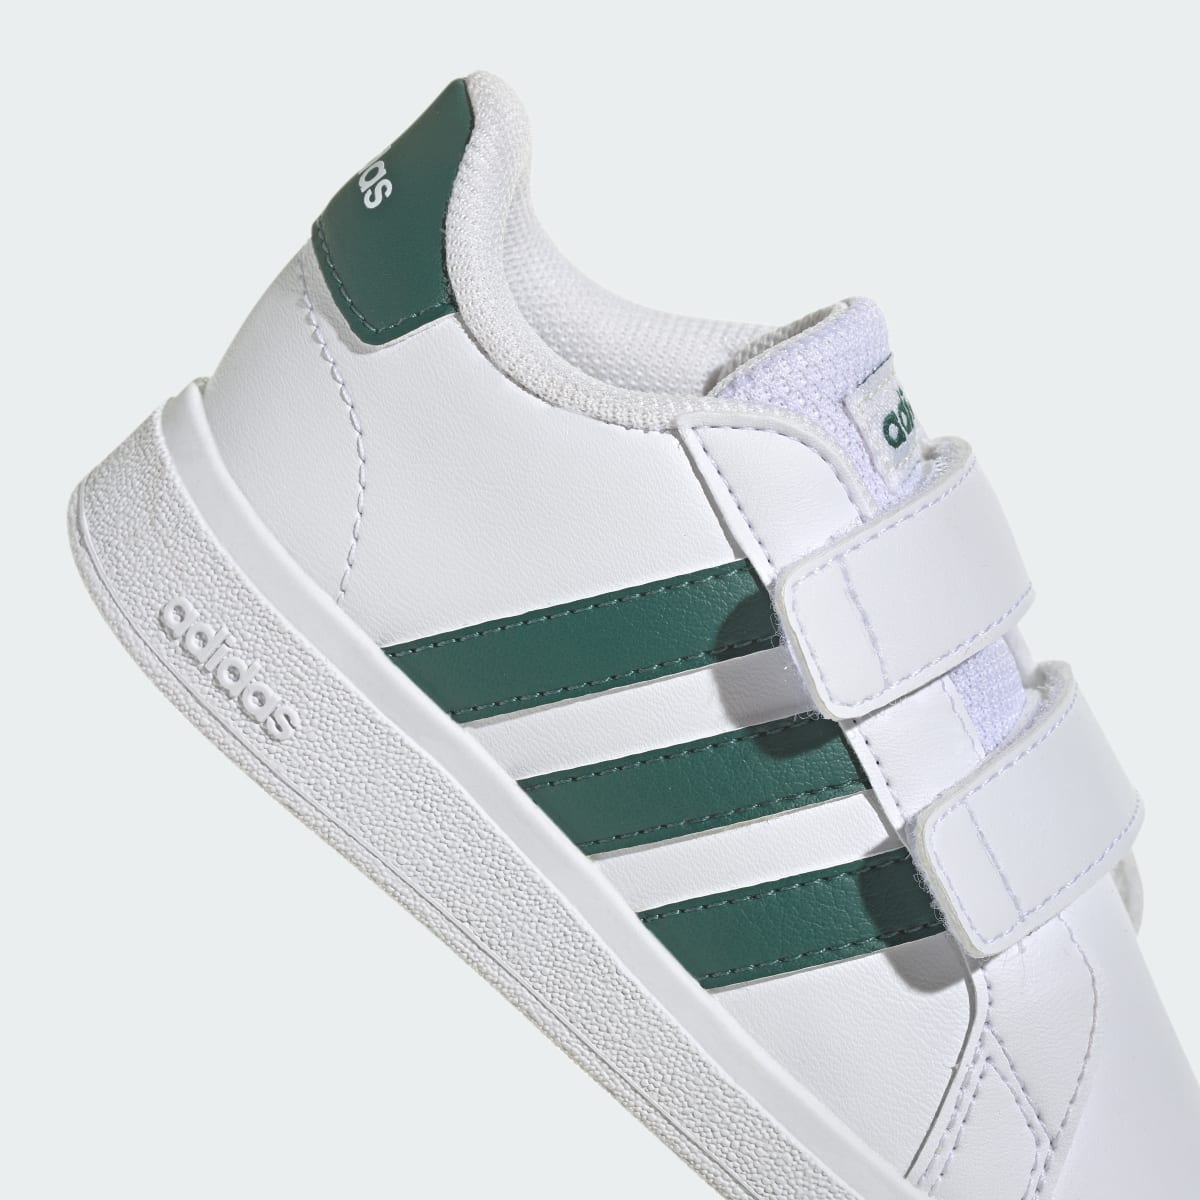 Adidas Grand Court Lifestyle Hook and Loop Shoes. 10